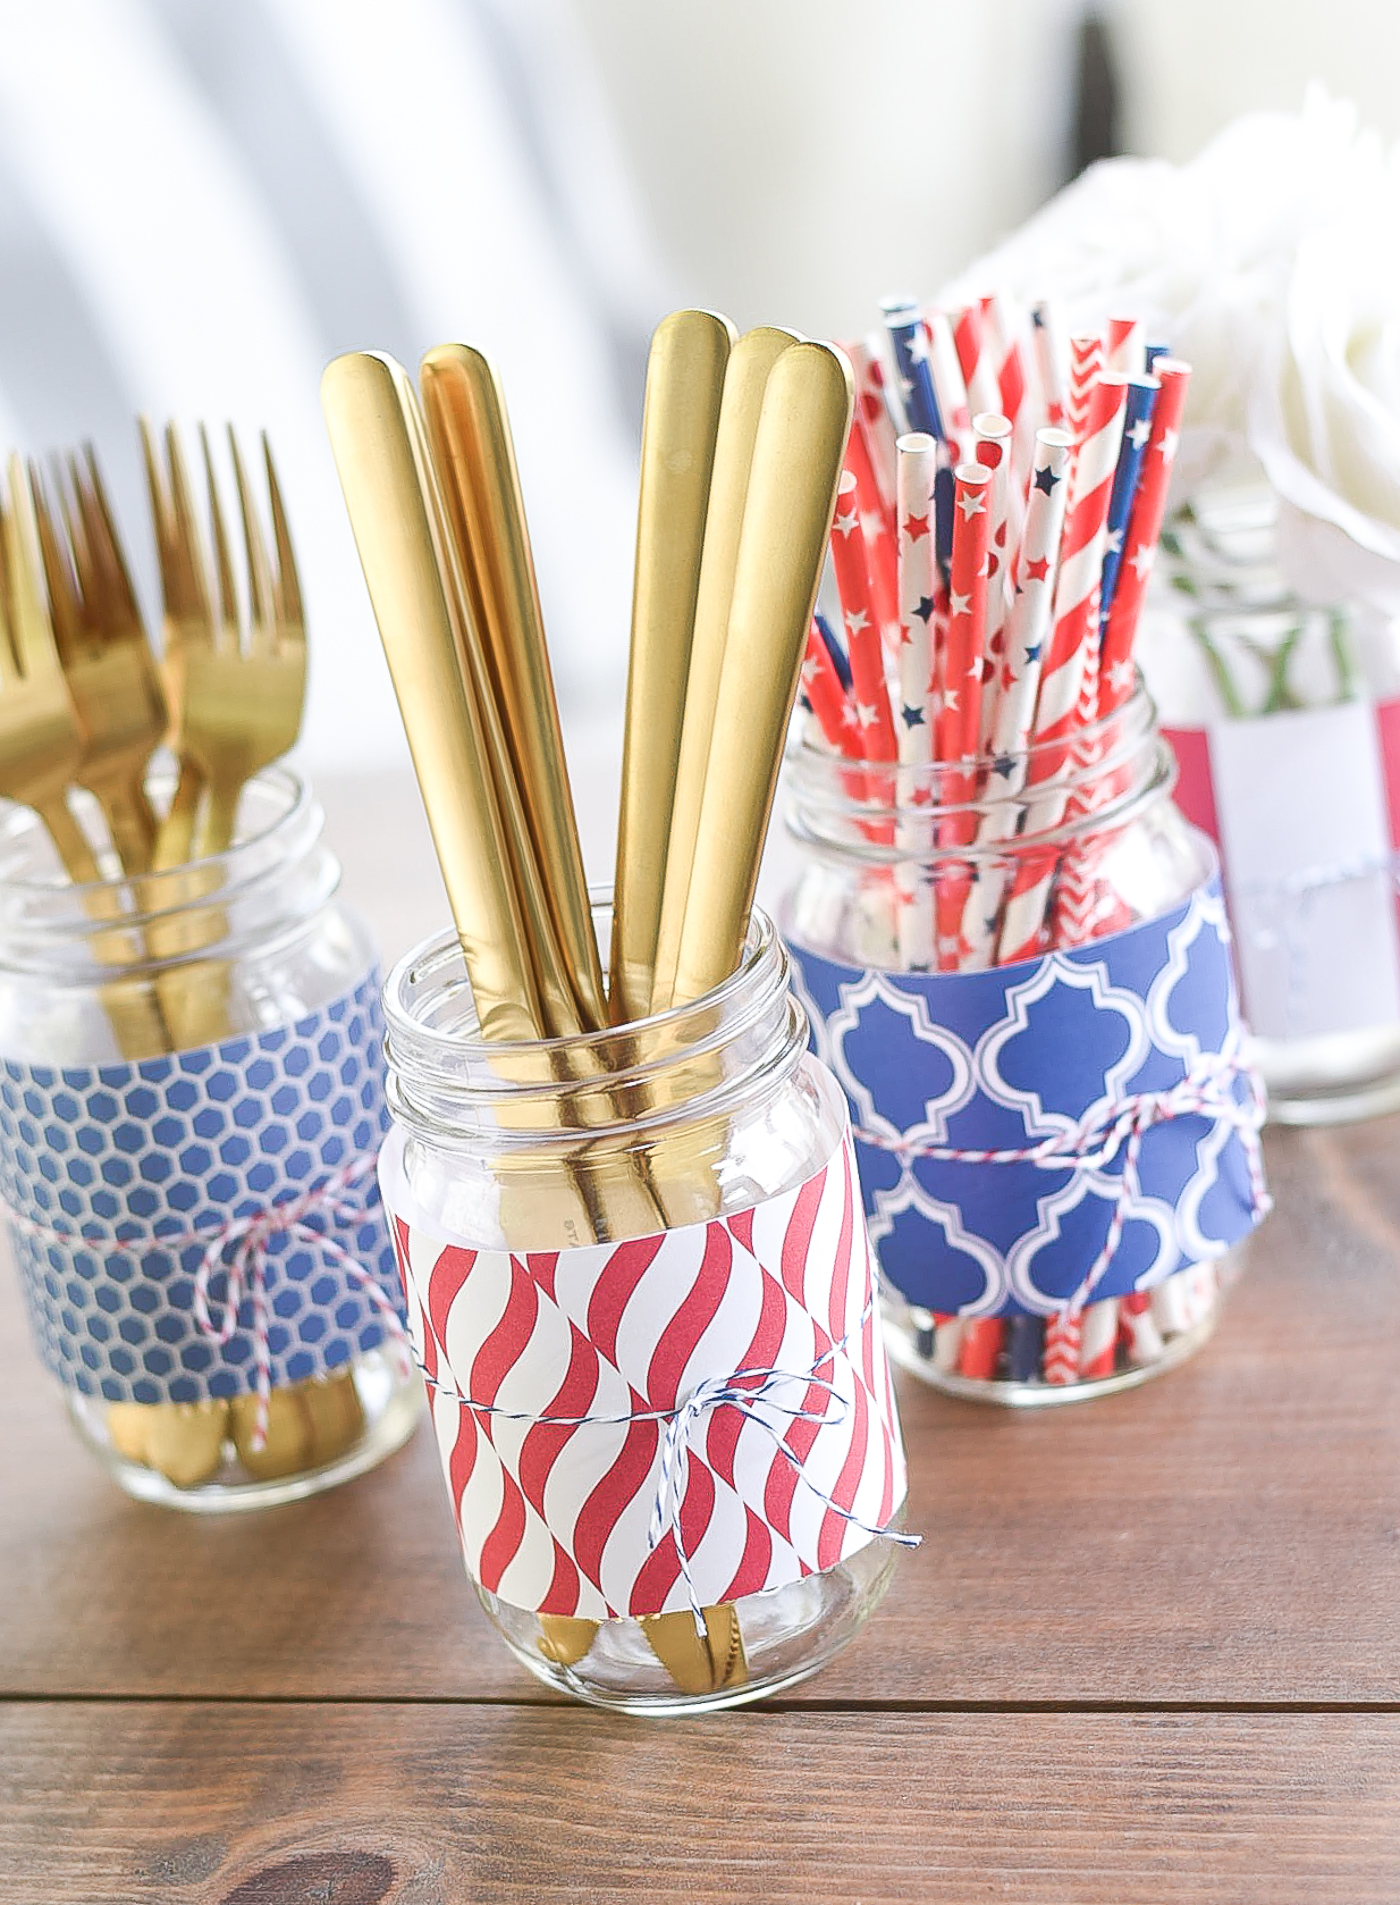 Red White Blue Mason Jar with Scrapbook Paper - Patriotic Mason Jars for Memorial Day, Fourth of July, Labor Day.